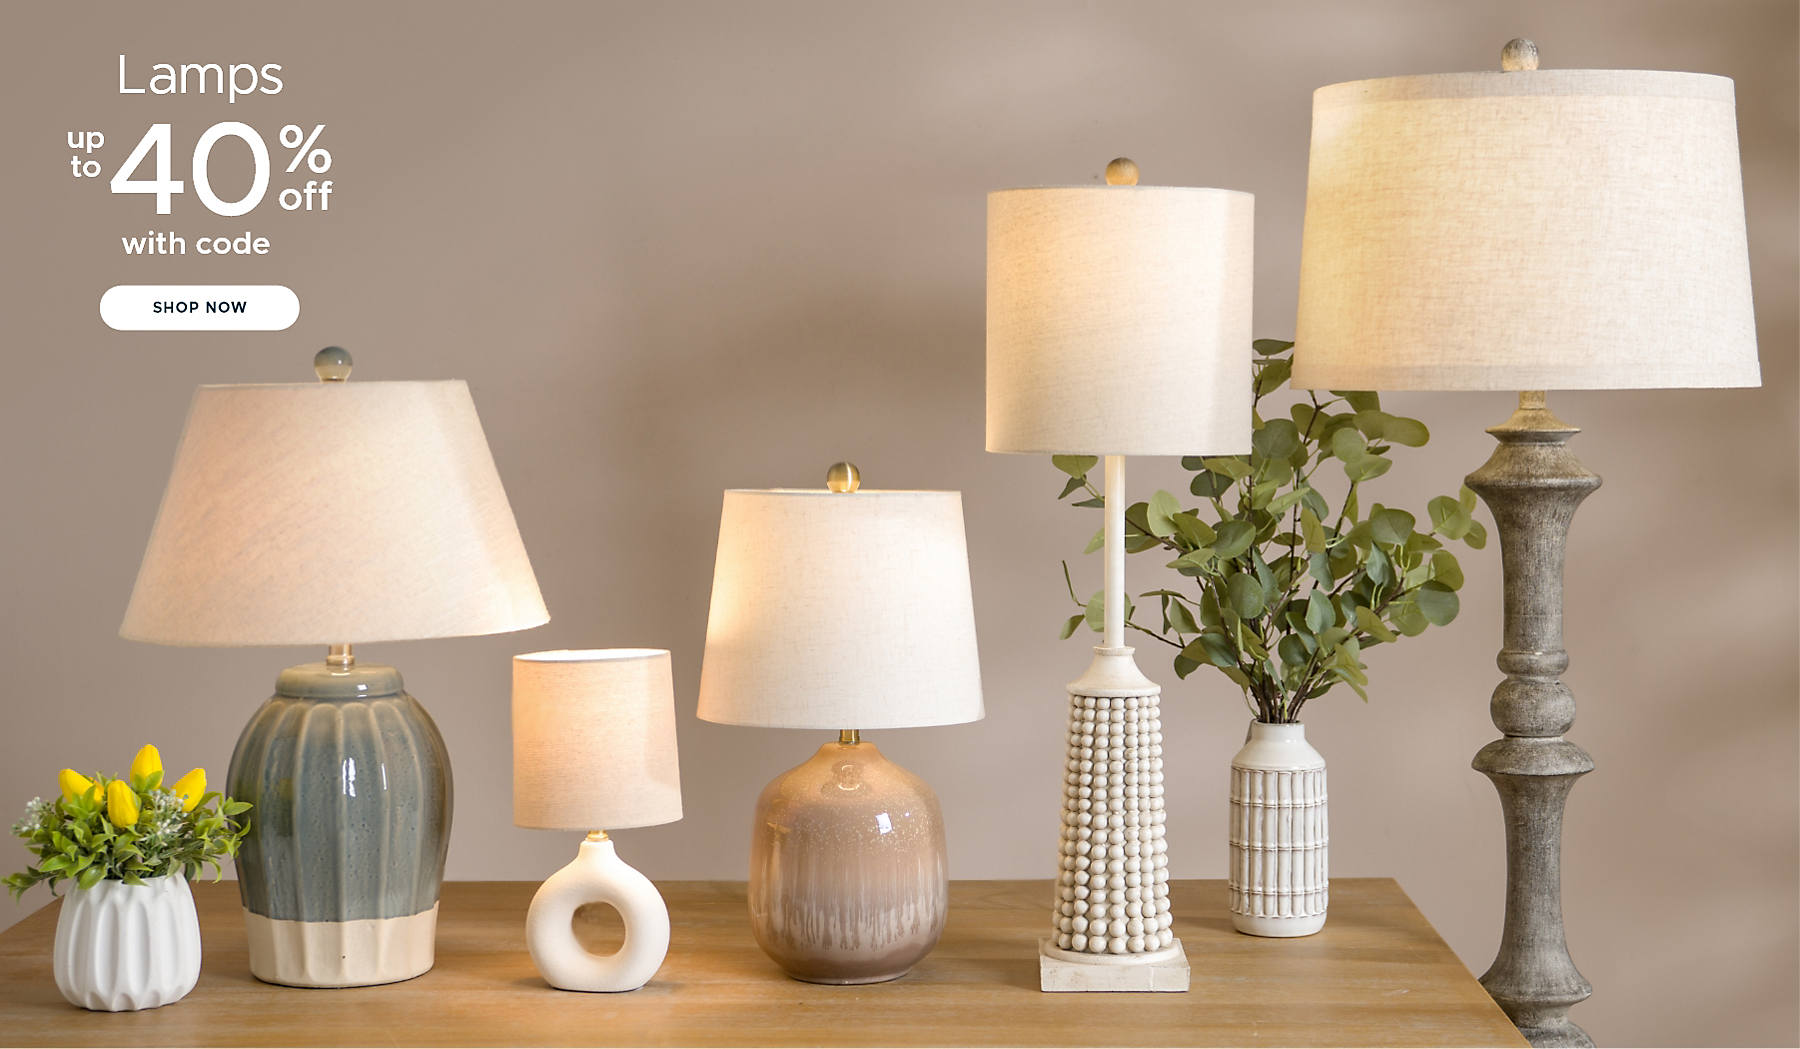 Lamps up to 40% off with code shop now